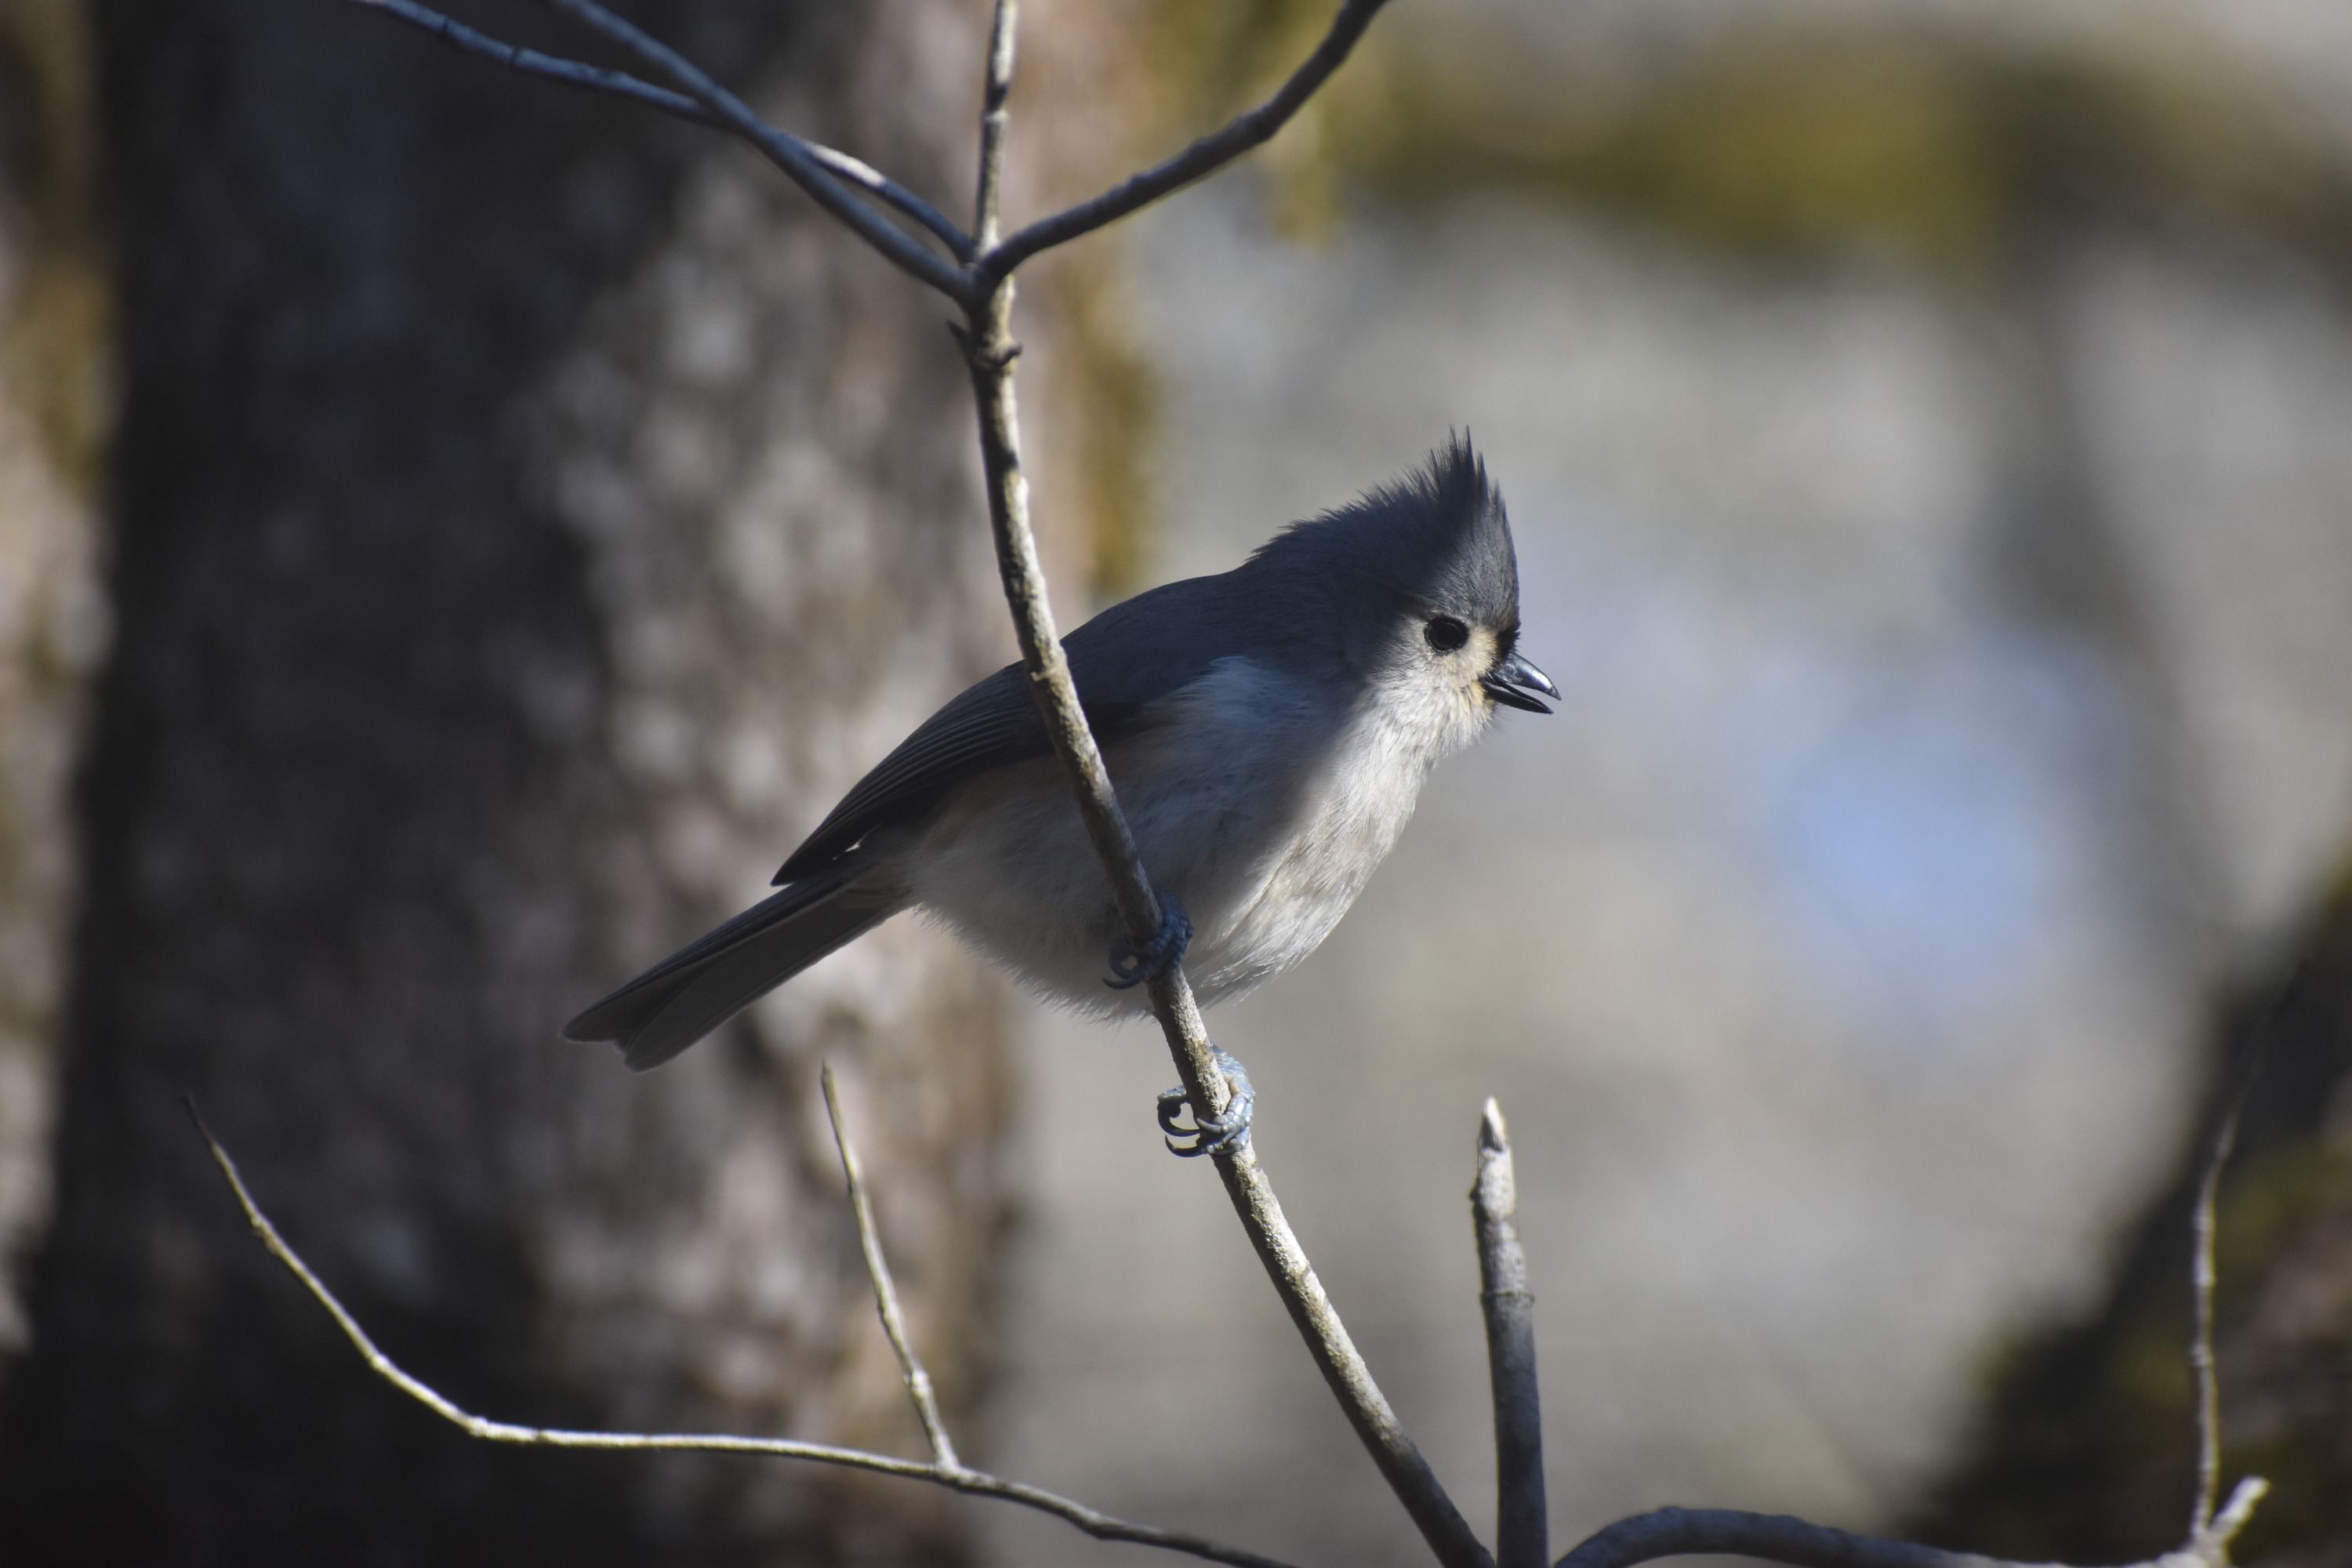 Tufted titmouse standing on a branch